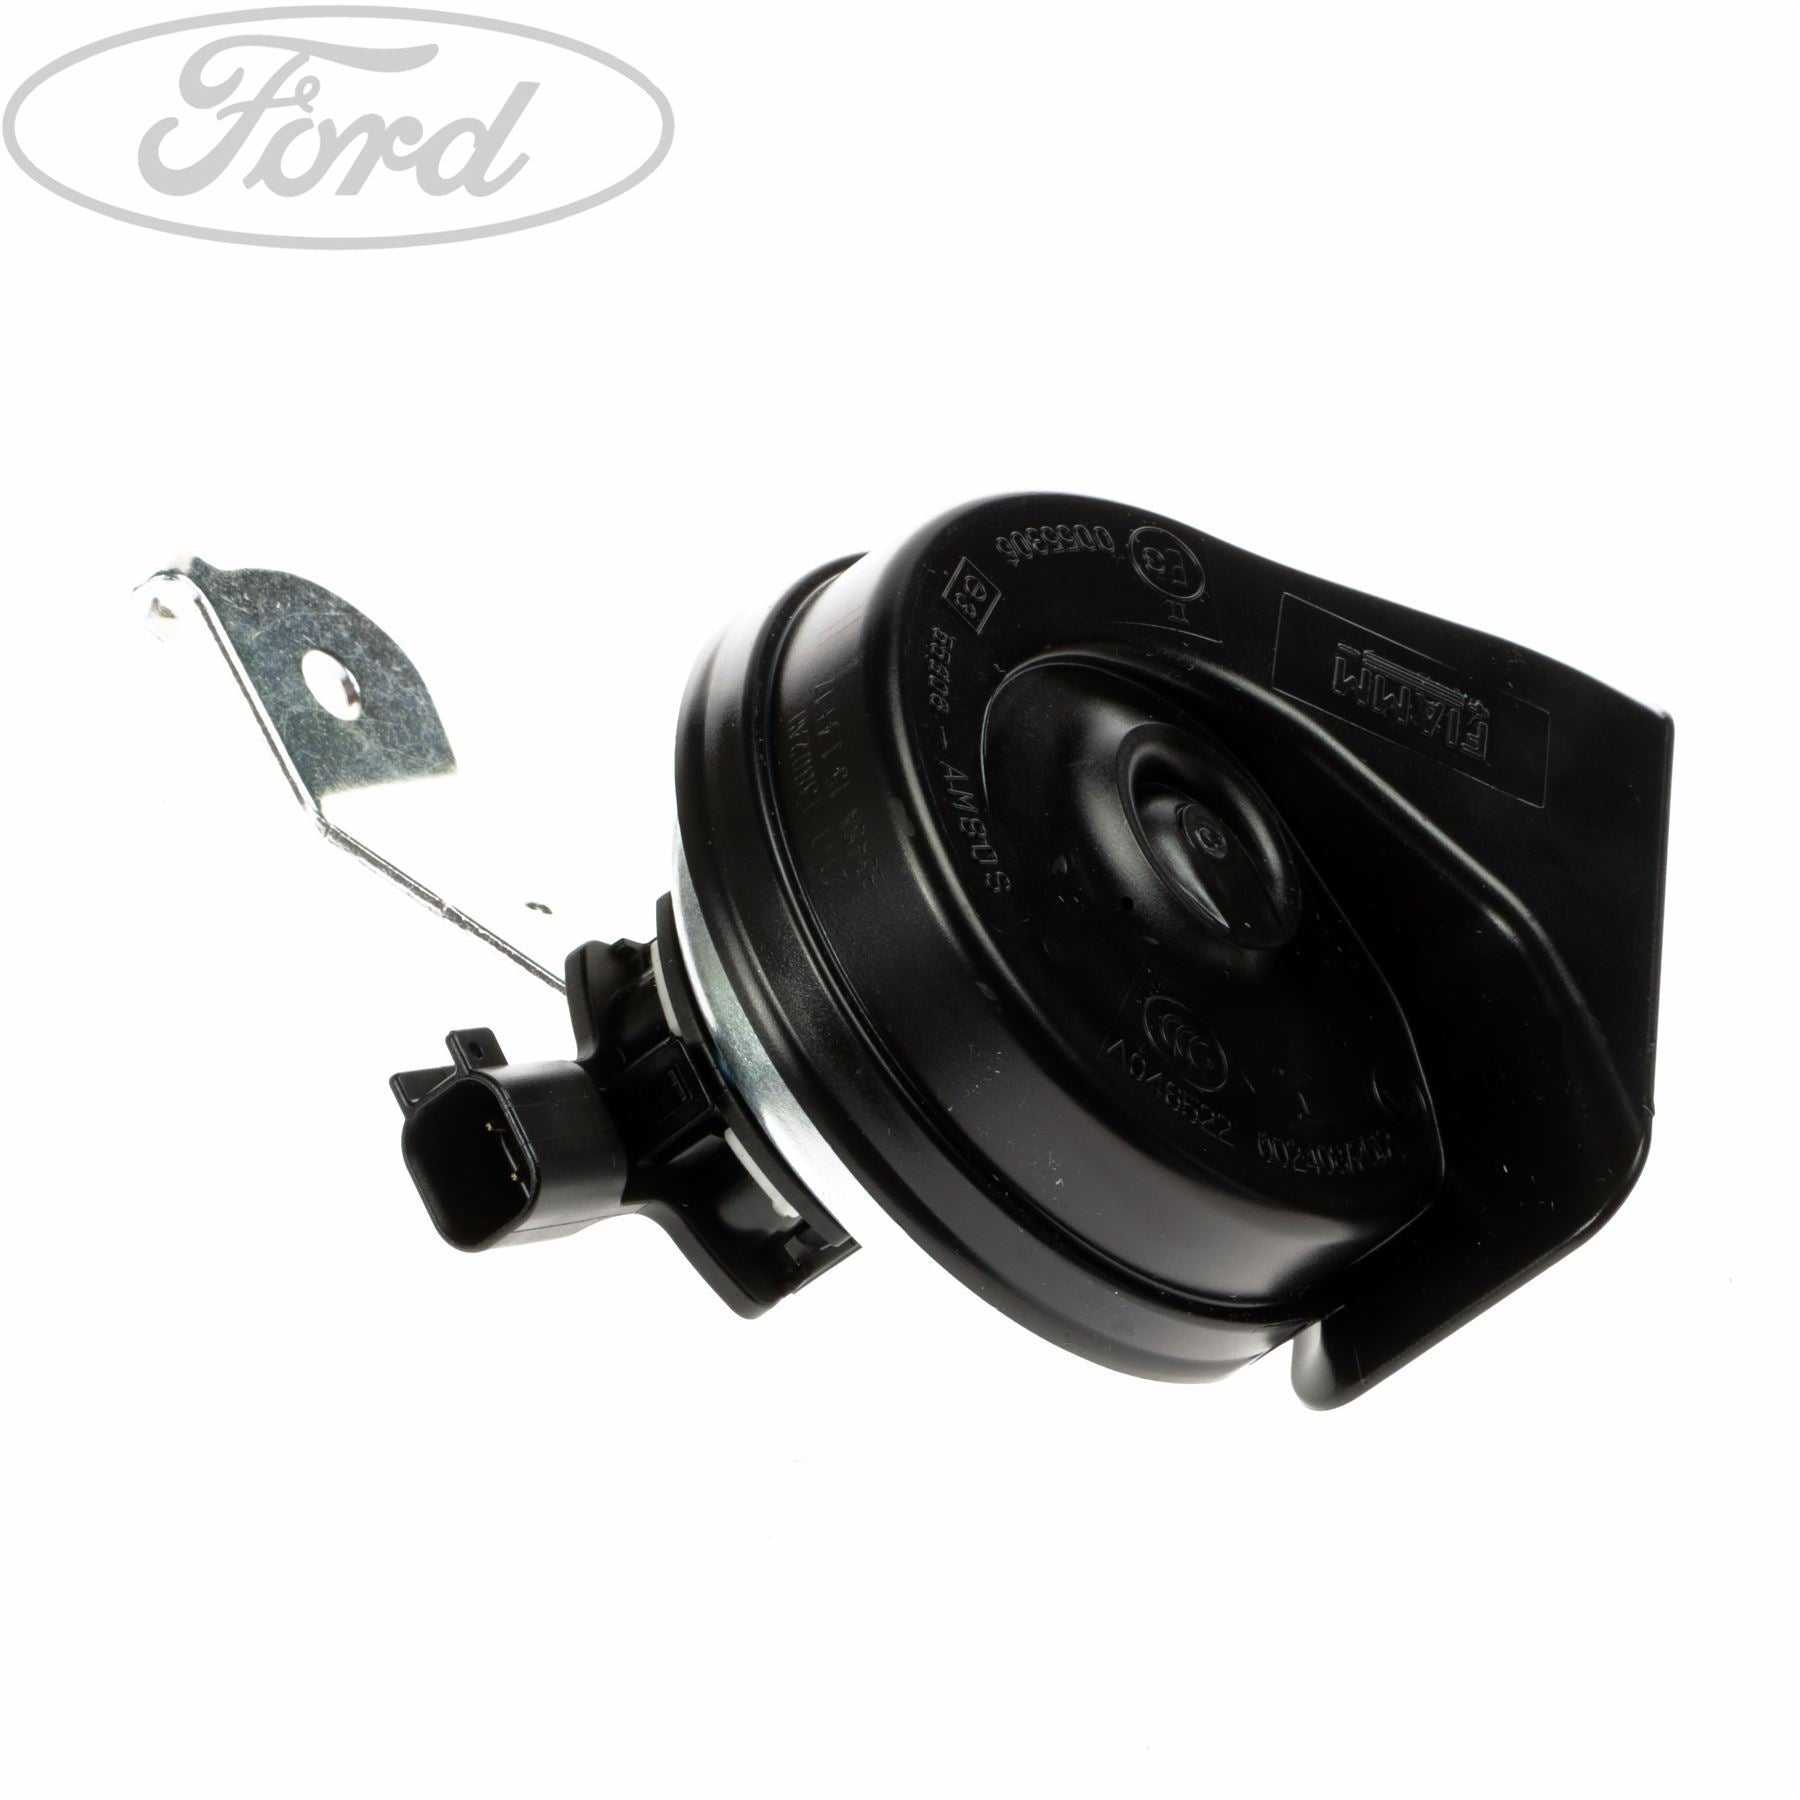 Ford, TRANSIT CONNECT LOW PITCH CAR HORN